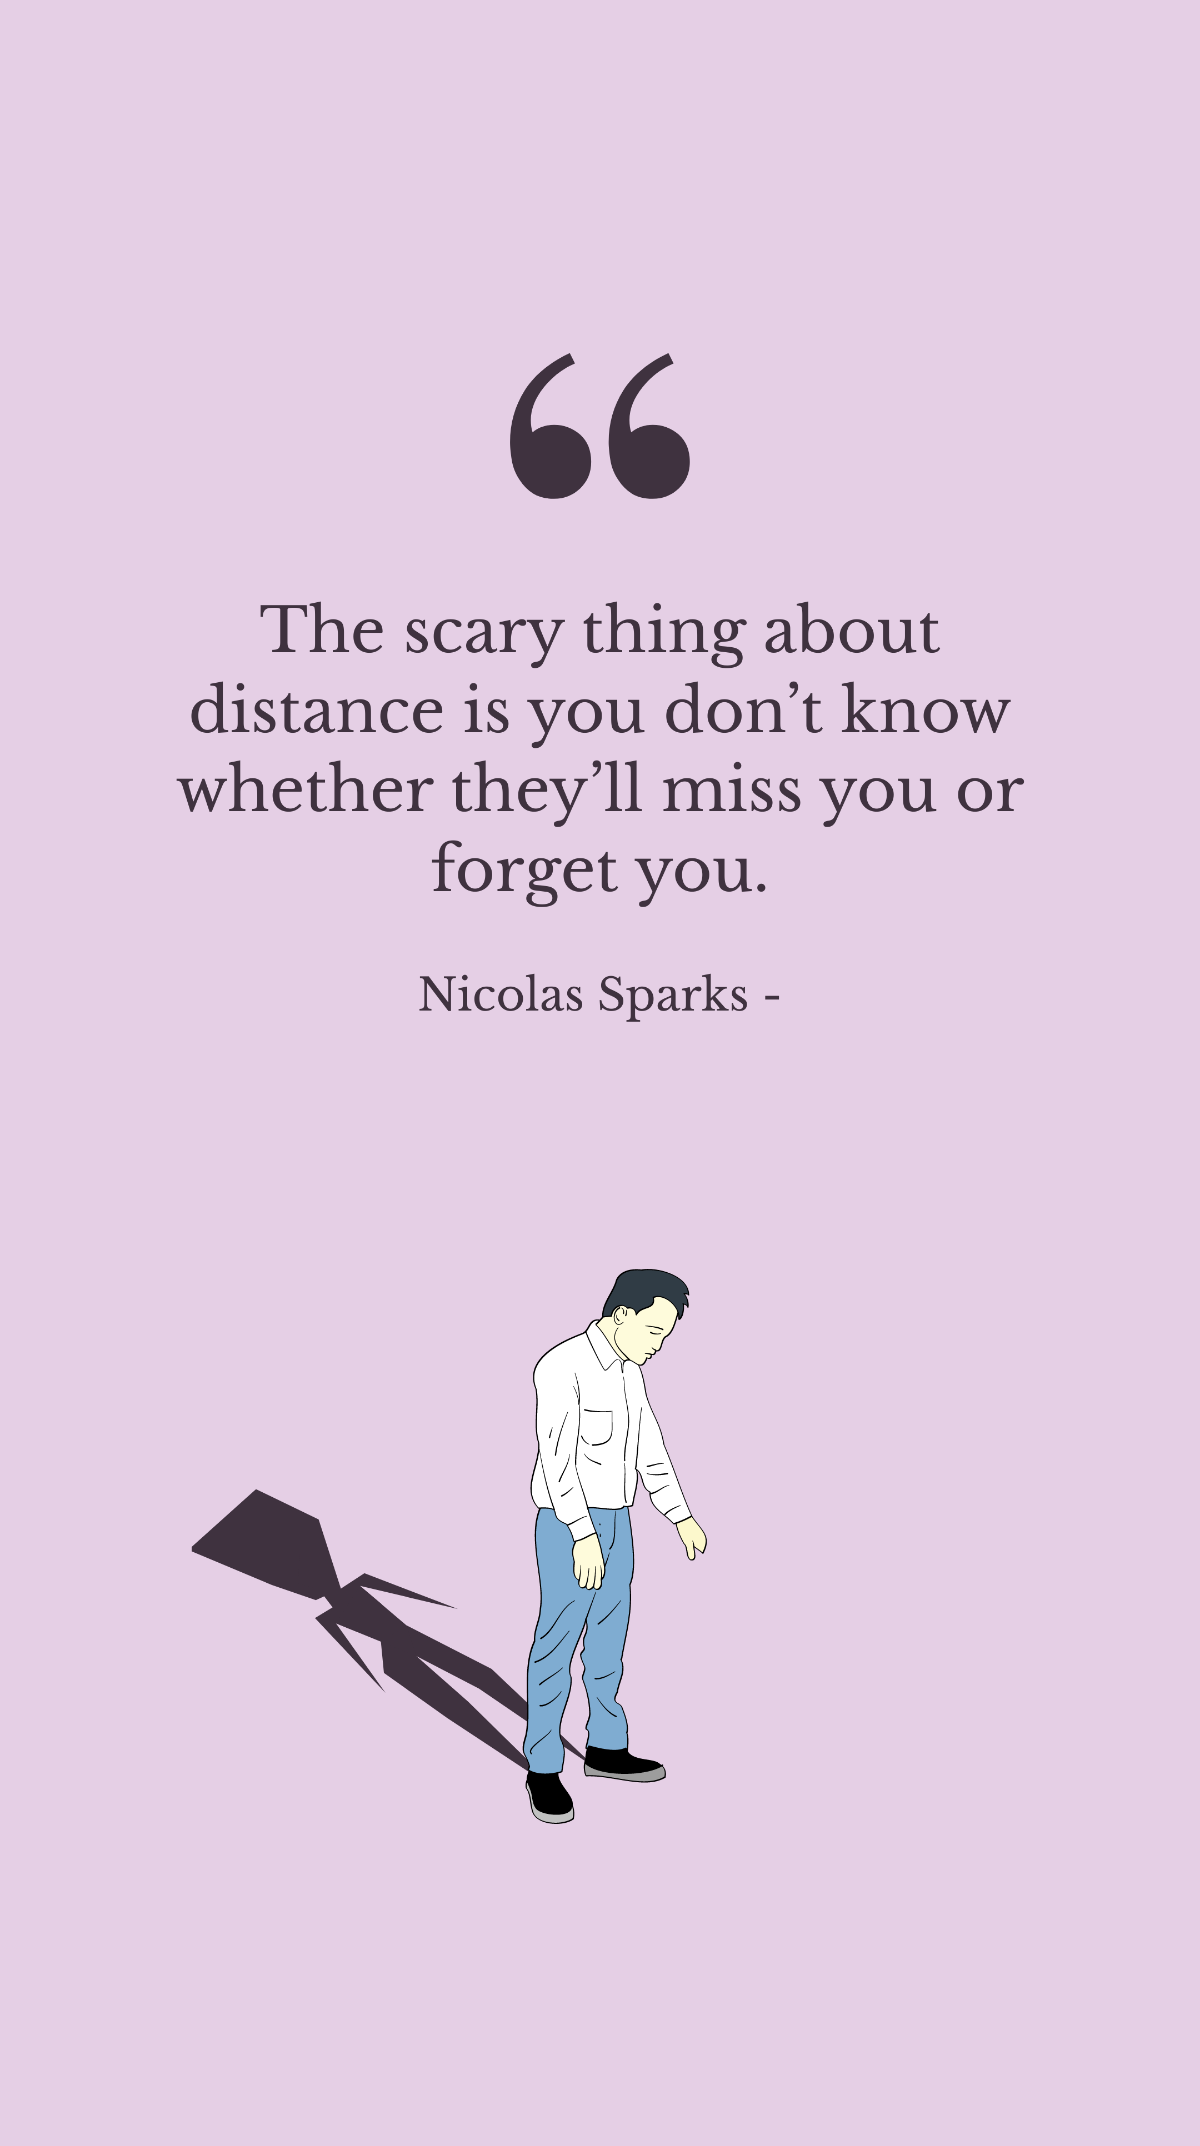 Nicolas Sparks - The scary thing about distance is you don’t know whether they’ll miss you or forget you. Template